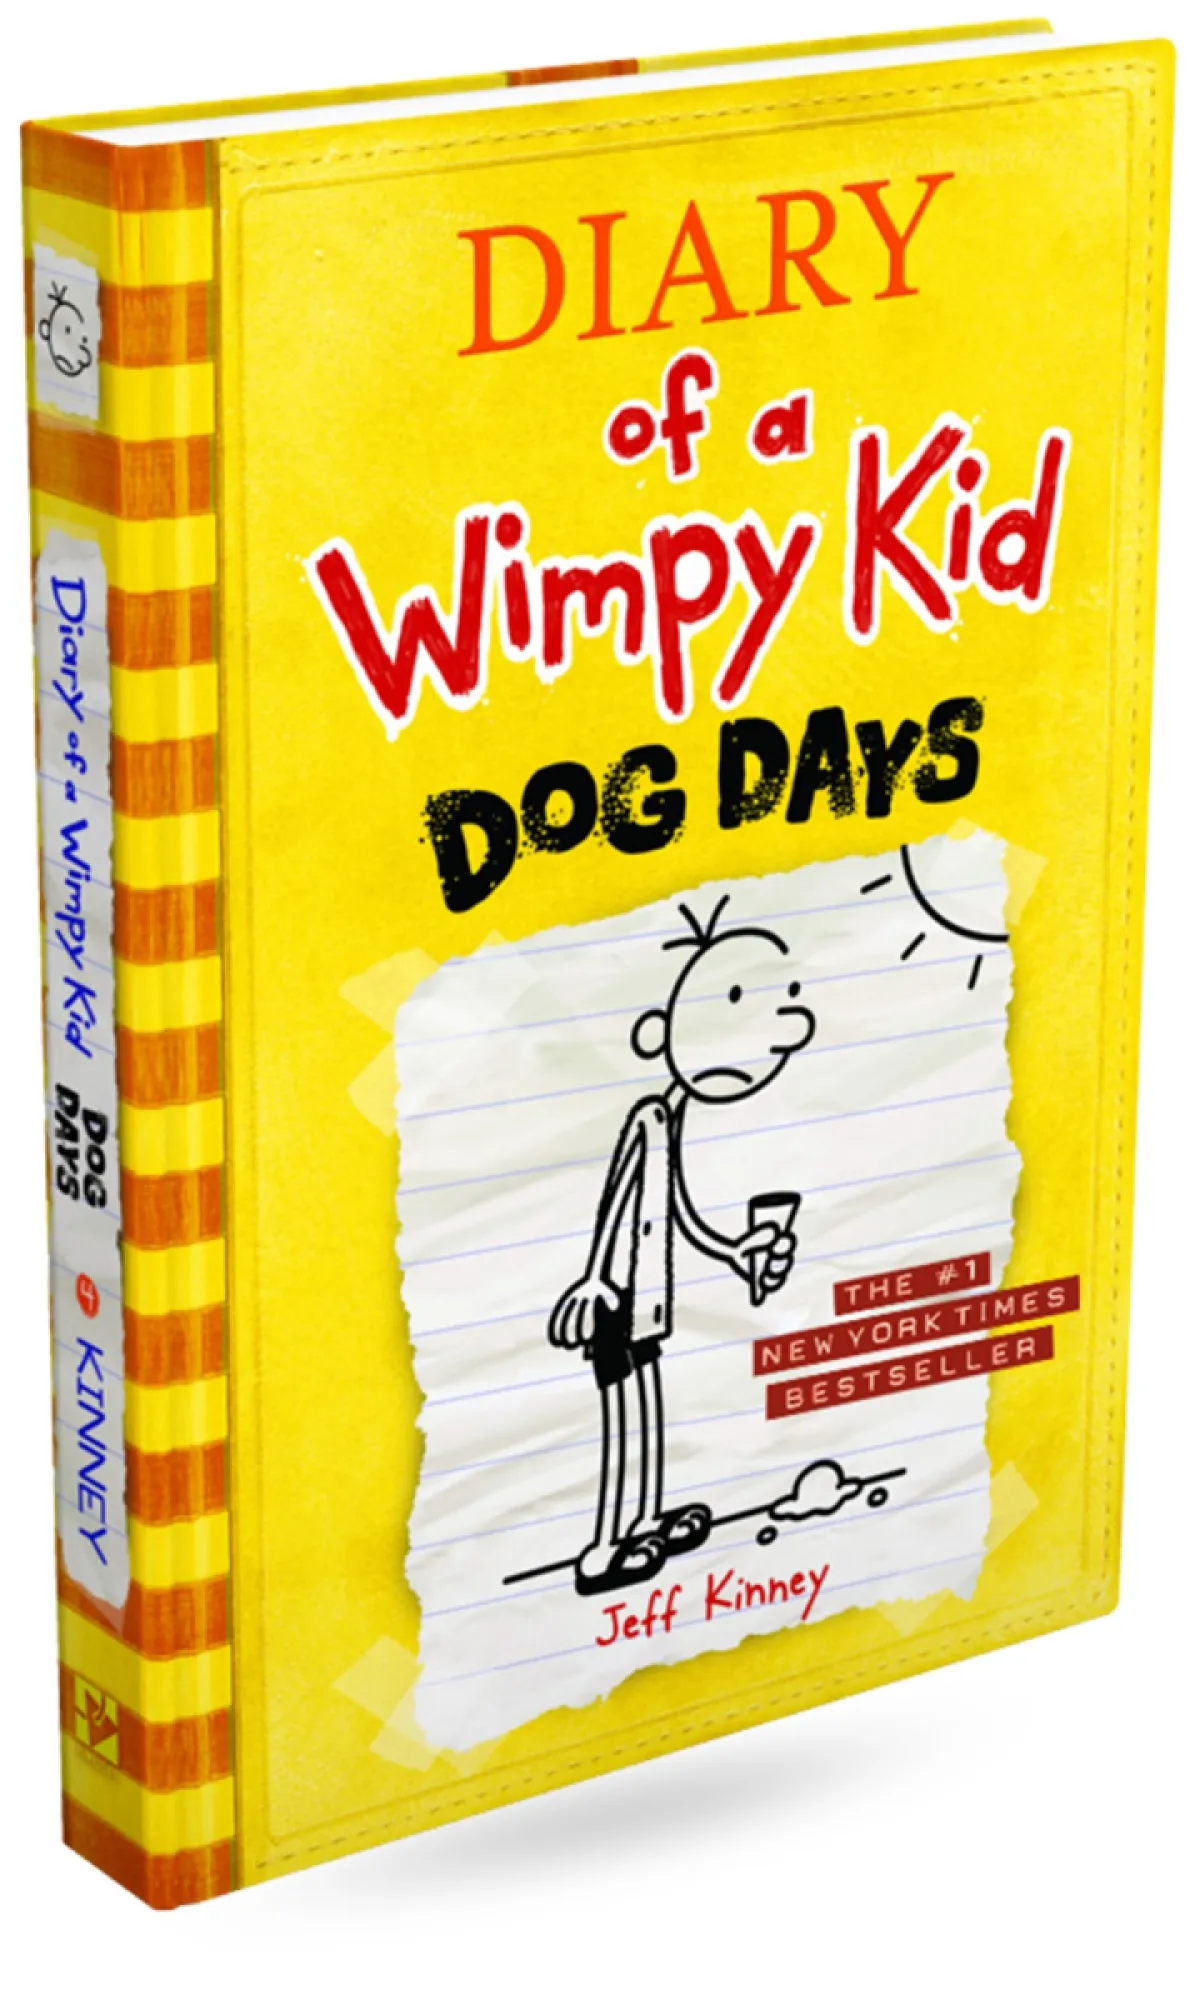 yellow book with sad cartoon character on front. Diary of a Wimpy Kid Dog Days